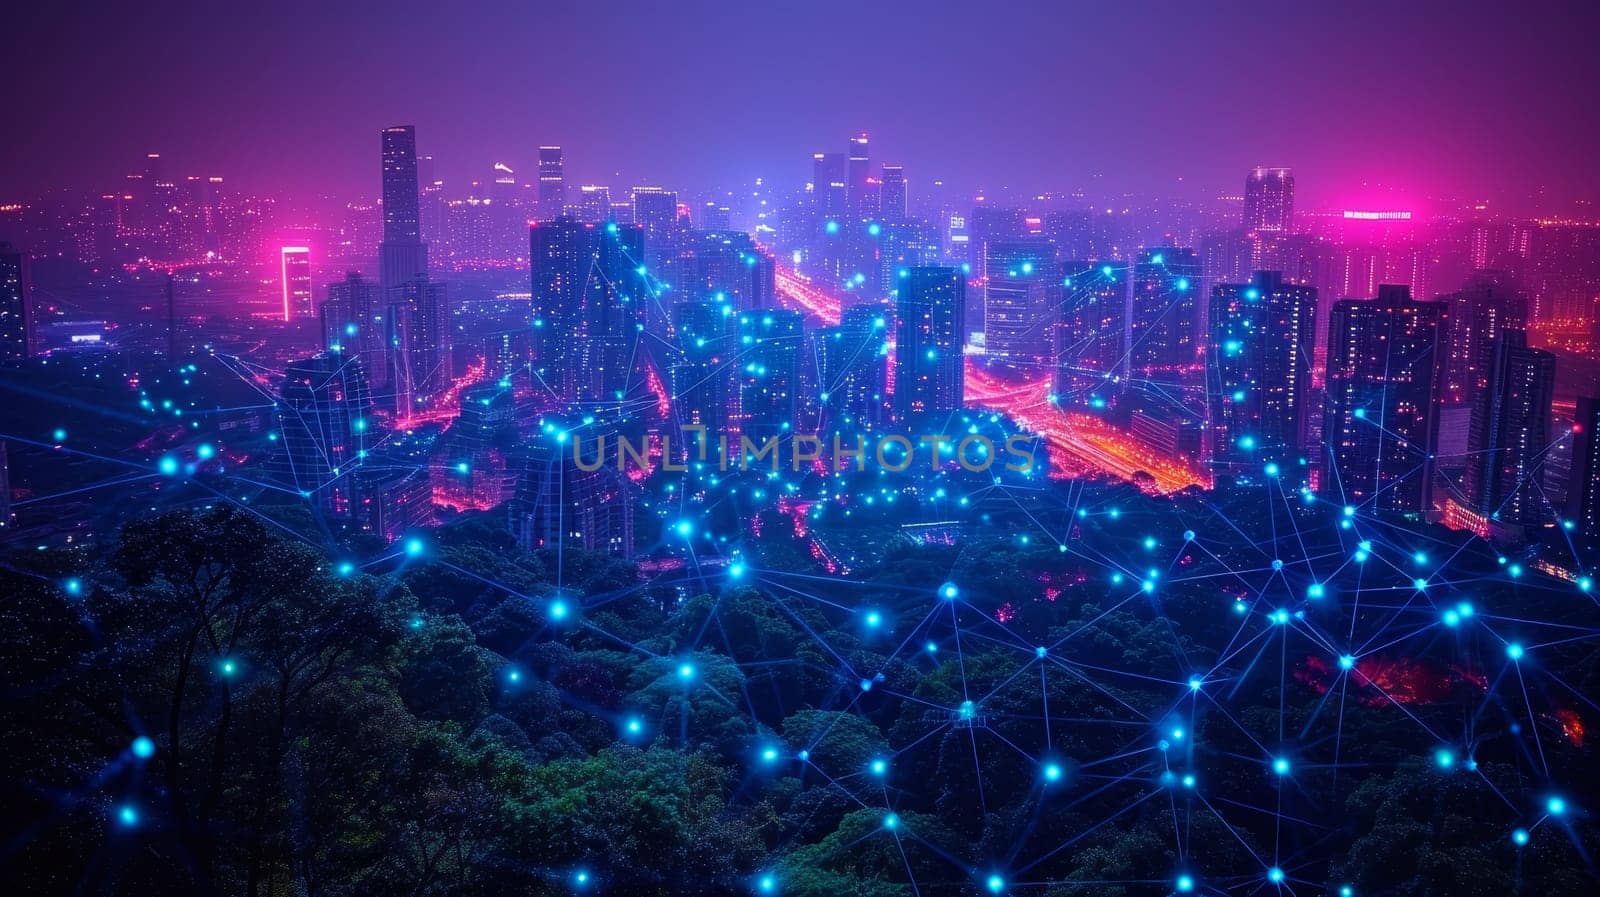 A modern city with wireless network connection and a cityscape concept. Wireless network and connection technology concept with a night-time city backdrop.